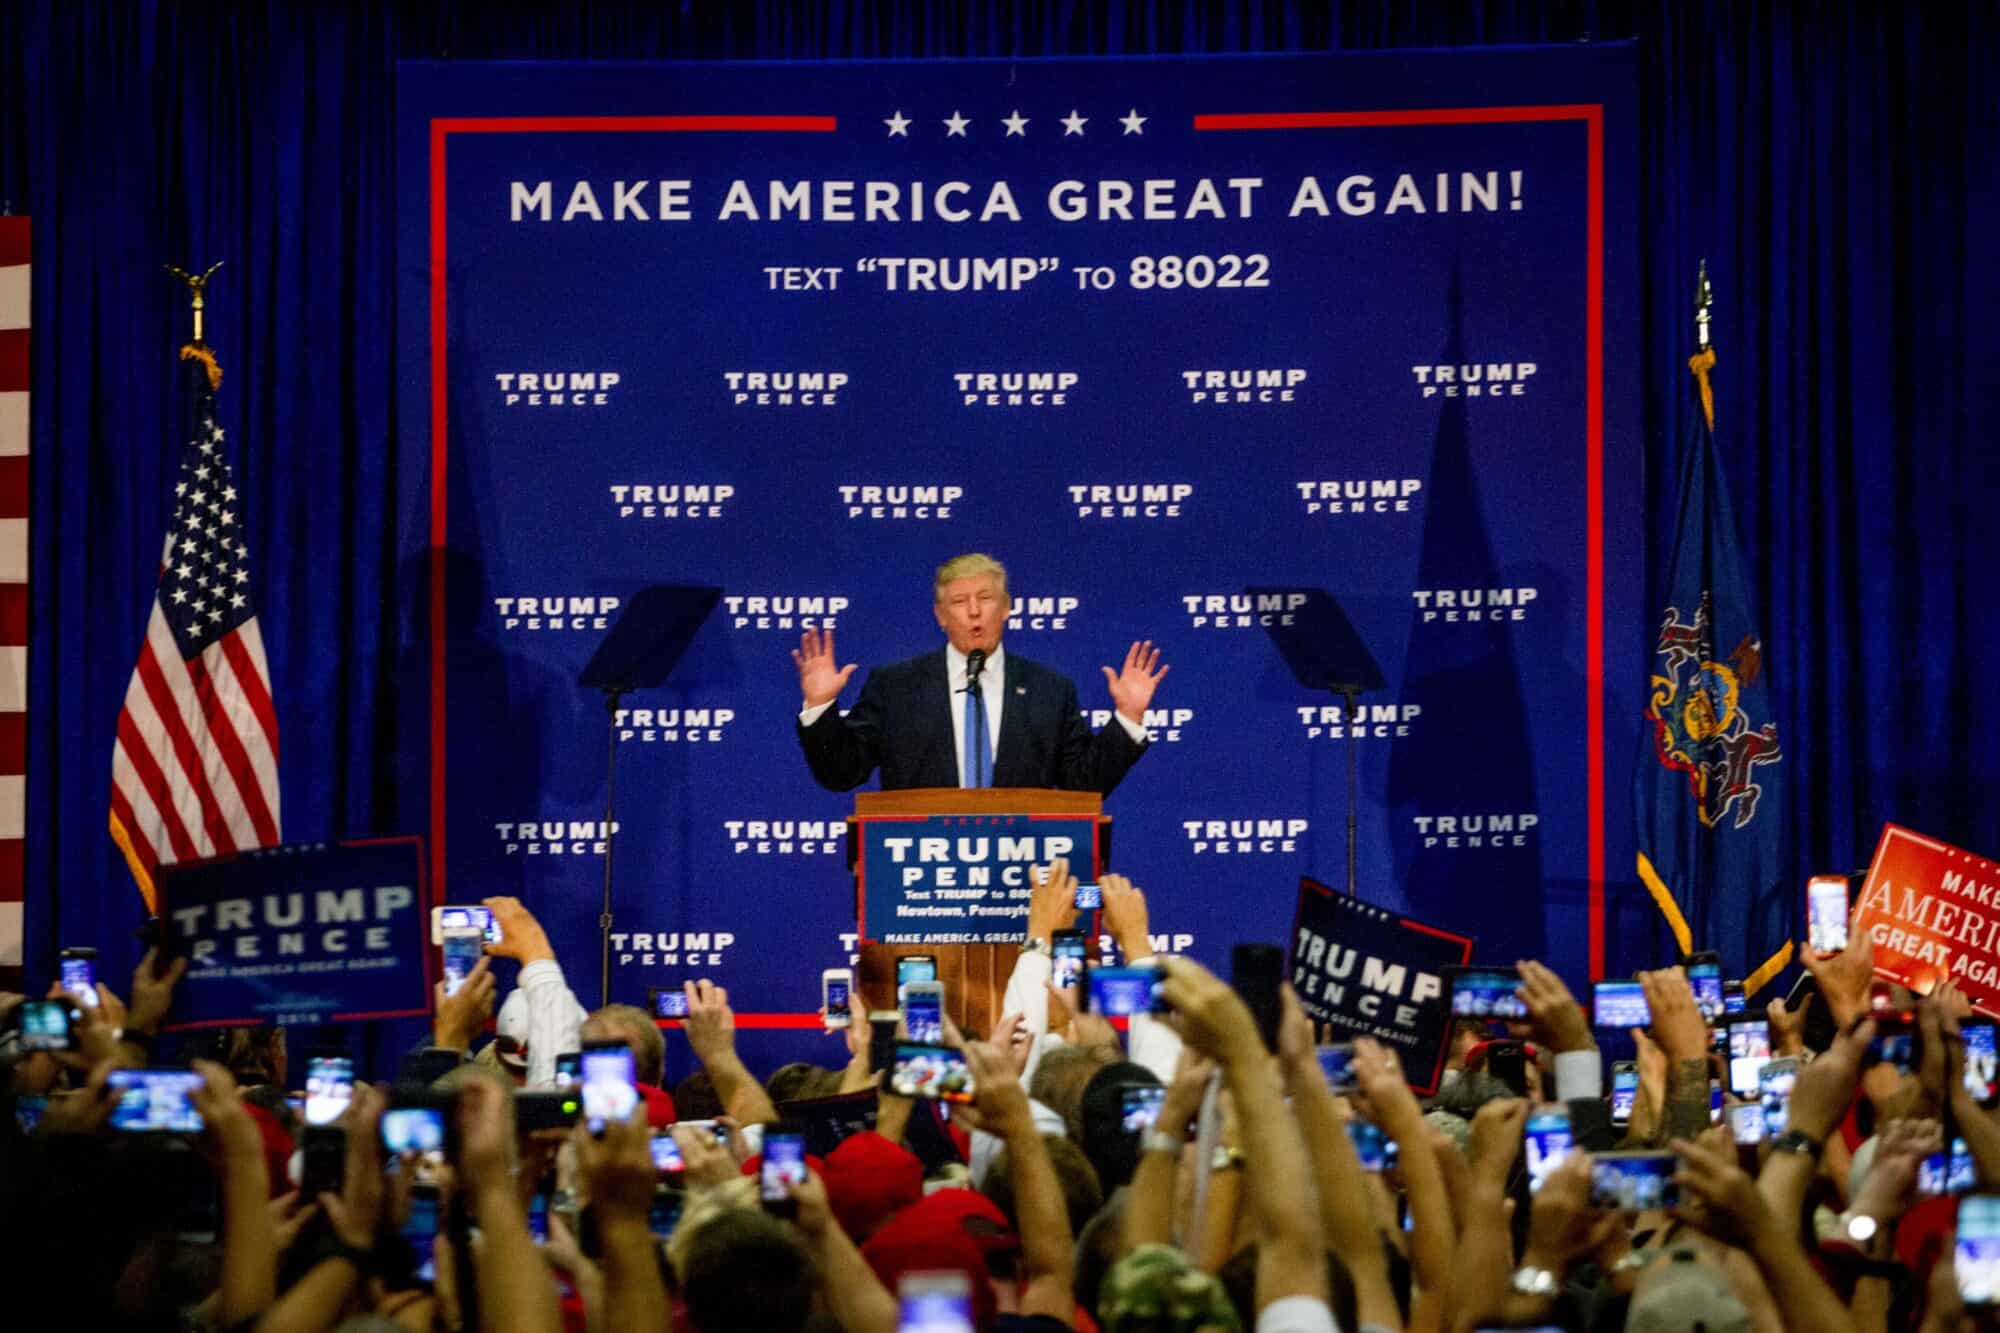 GOP Presidential nominee Donald Trump holds a rally in Newtown, Bucks County, PA, Friday, October 21, 2016.